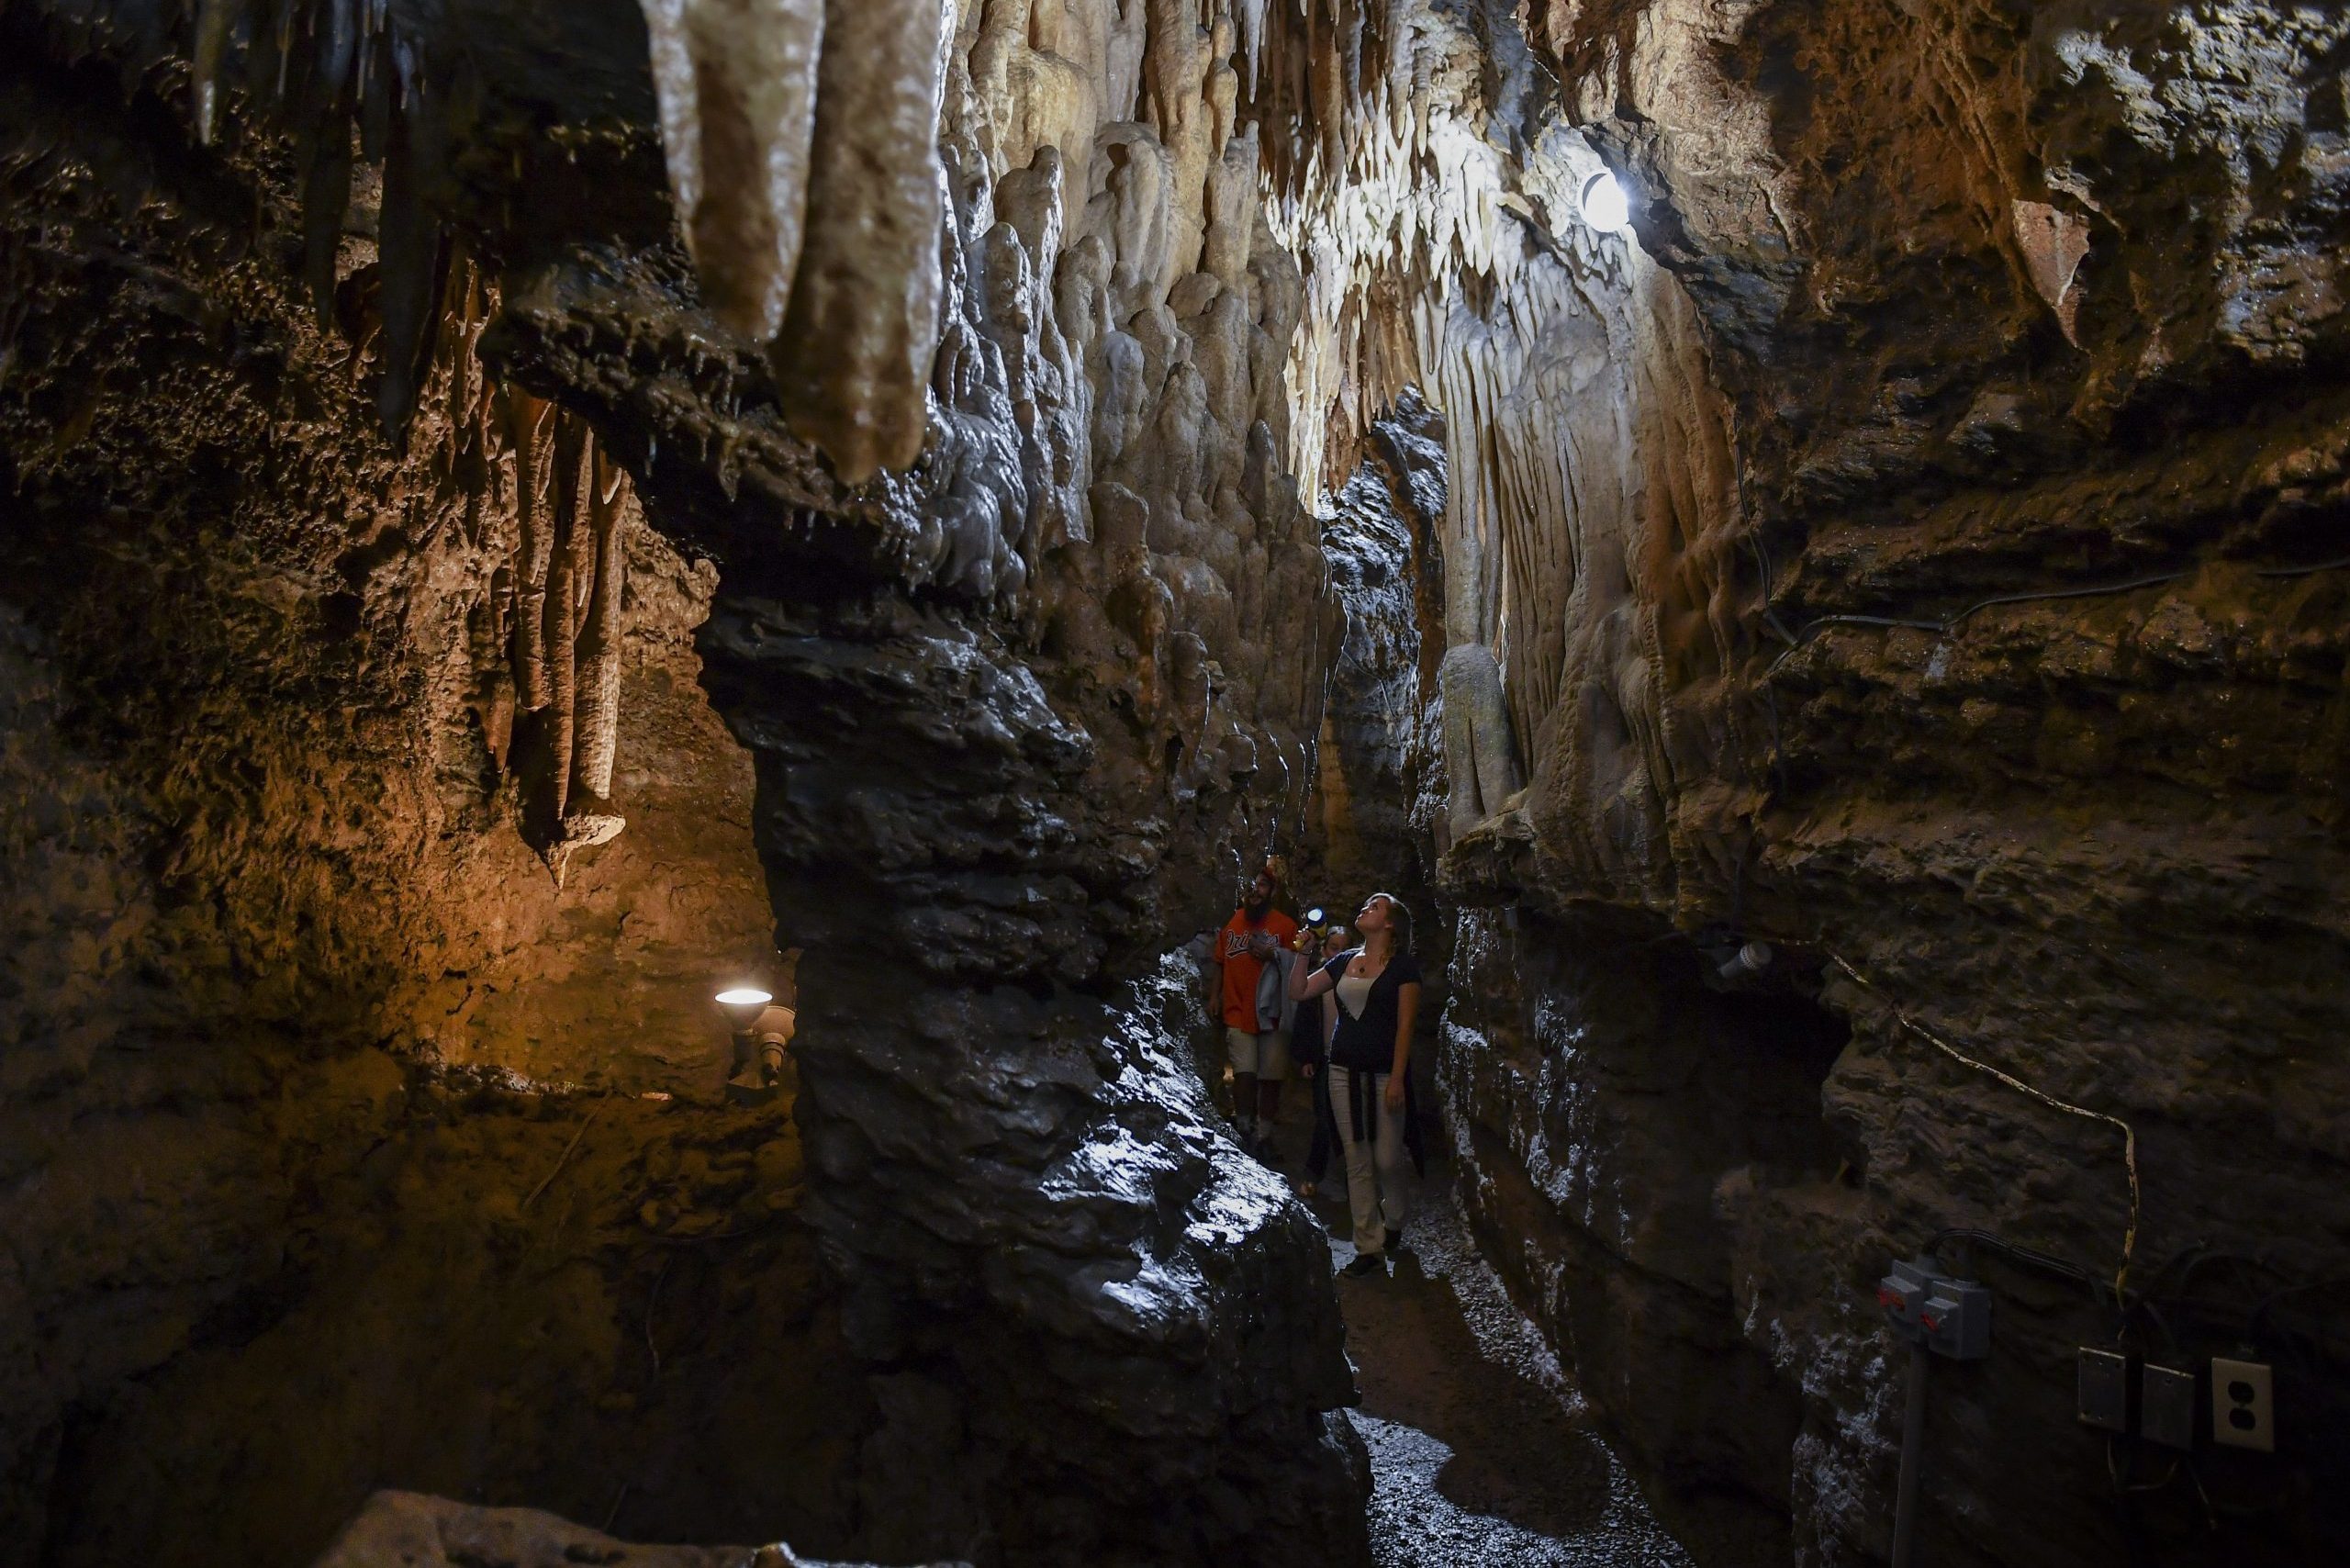 <p>This is one of those hidden gems that, quite literally, is home to hidden gems. Unleash your inner geologist by heading underground and touring the <a href="https://www.tripadvisor.com/Attraction_Review-g41012-d264772-Reviews-Crystal_Grottoes_Caverns-Boonsboro_Maryland.html" rel="noopener">Crystal Grottoes Caverns</a> in Boonsboro. Founded back in 1920, this natural cave boasts breathtaking crystals and is the most naturally kept cave in the world. Tours are open Friday through Sunday from 10 a.m. to 5 p.m.; admission is $23, but kids age 5 to 12 get in for $13; kids under 5 are free. Bring a sweater for the tour—it gets chilly down there!</p> <p class="listicle-page__cta-button-shop"><a class="shop-btn" href="https://www.tripadvisor.com/Attraction_Review-g41012-d264772-Reviews-Crystal_Grottoes_Caverns-Boonsboro_Maryland.html">Learn More</a></p>